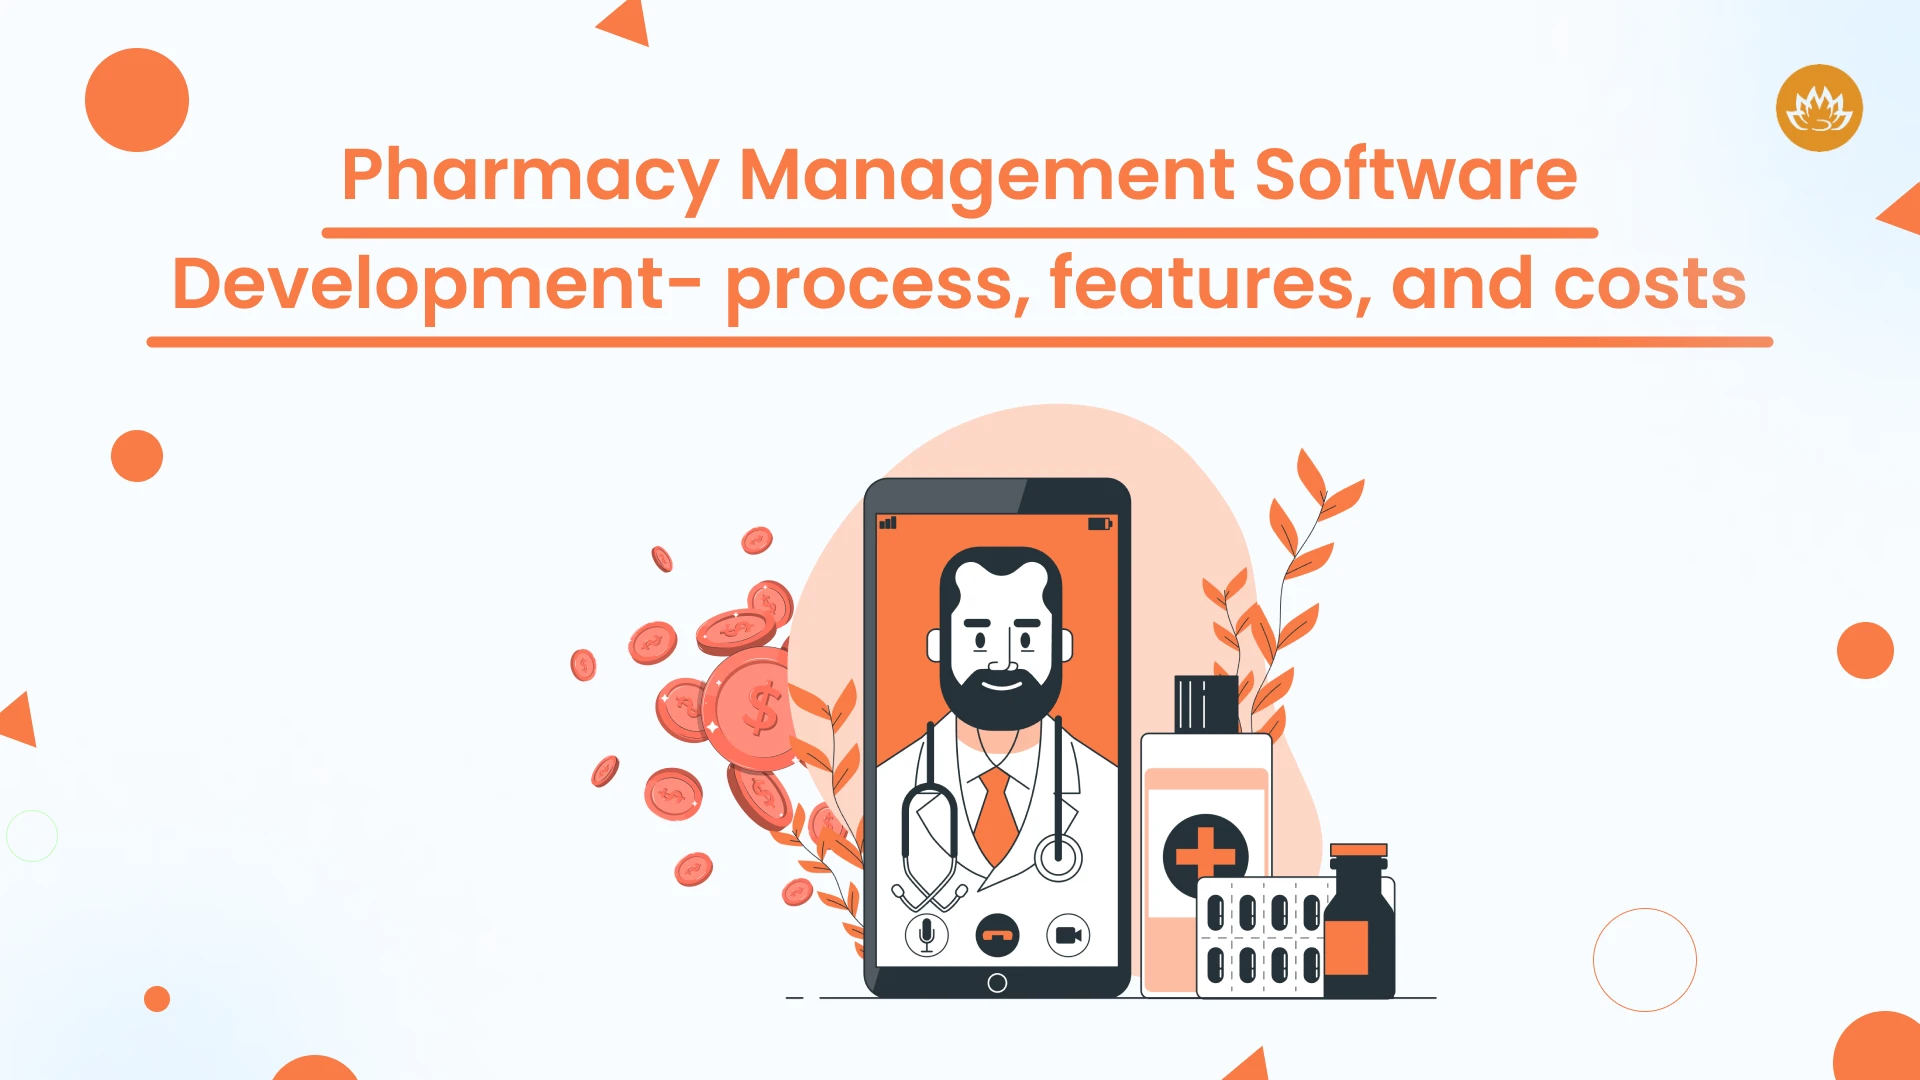 Pharmacy Management Software Development- process, features, and costs